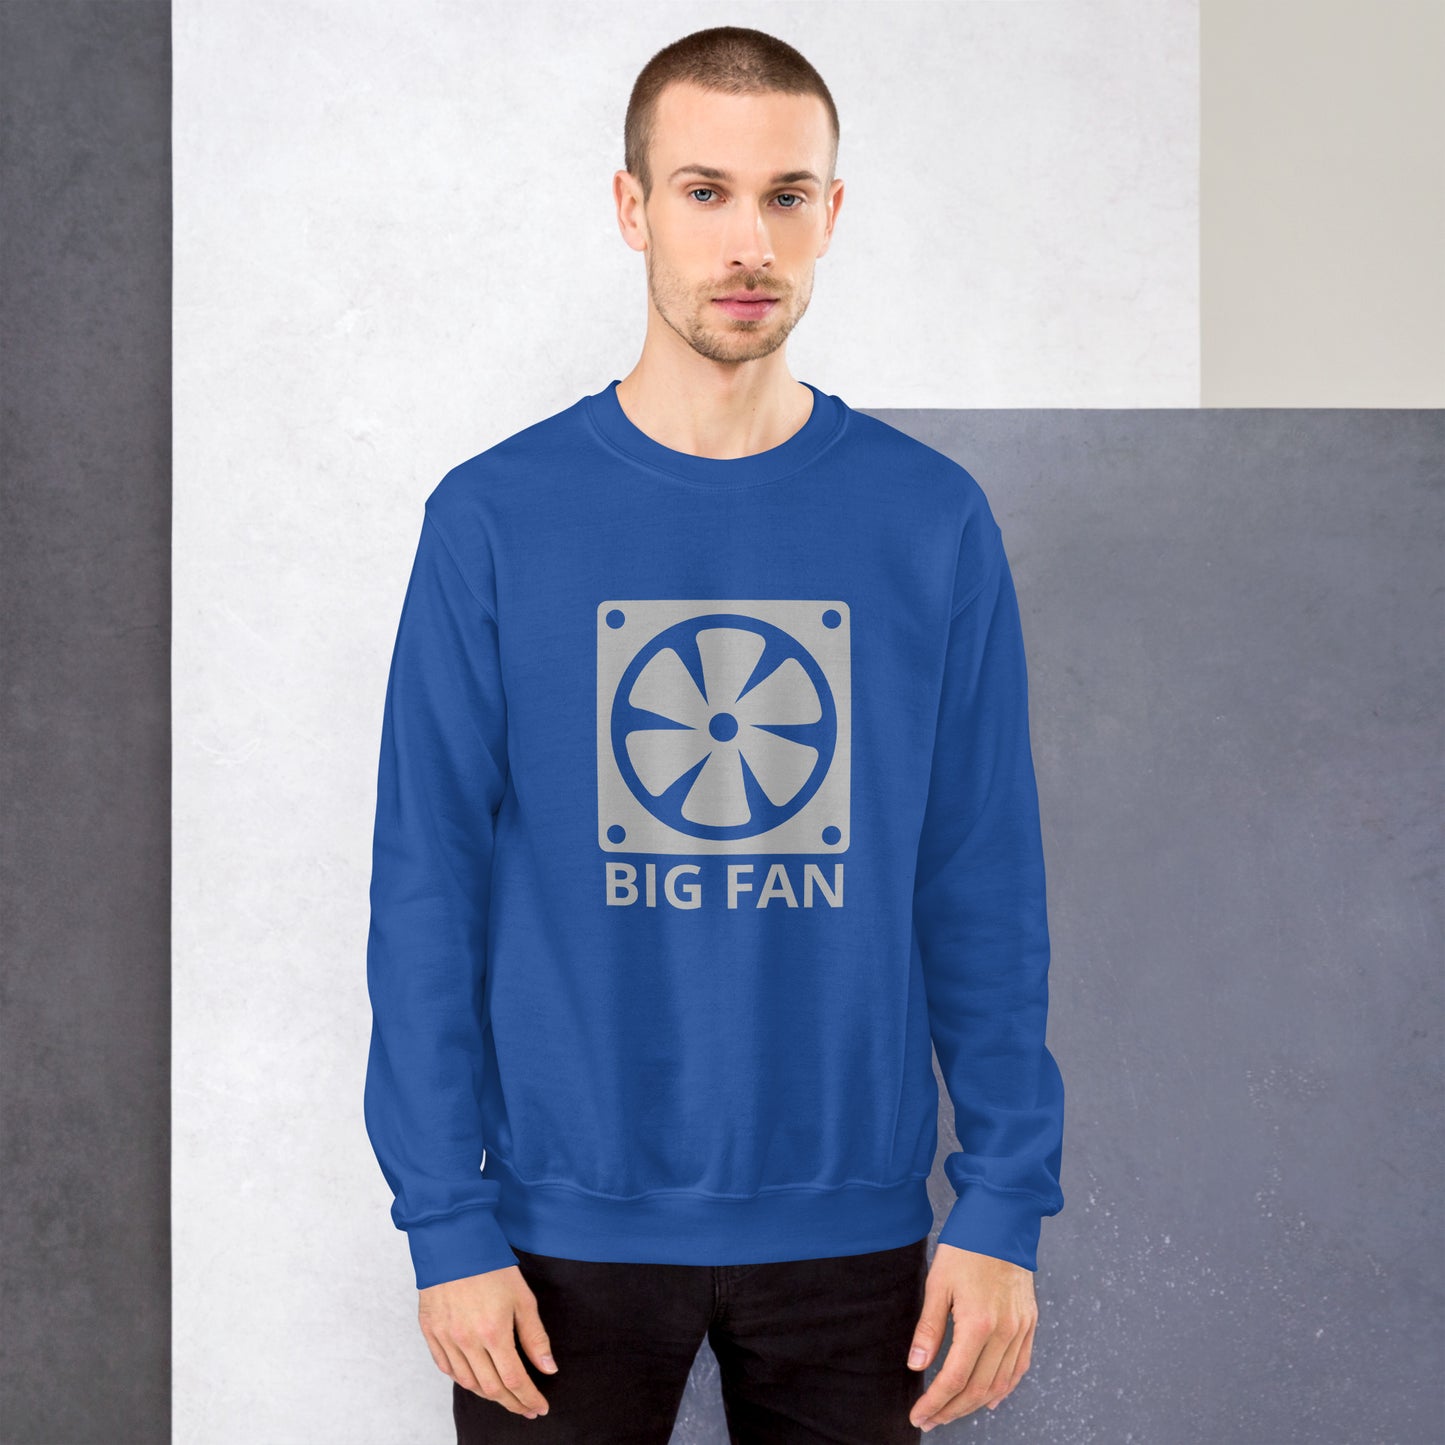 Men with royal blue sweatshirt with image of a big computer fan and the text "BIG FAN"